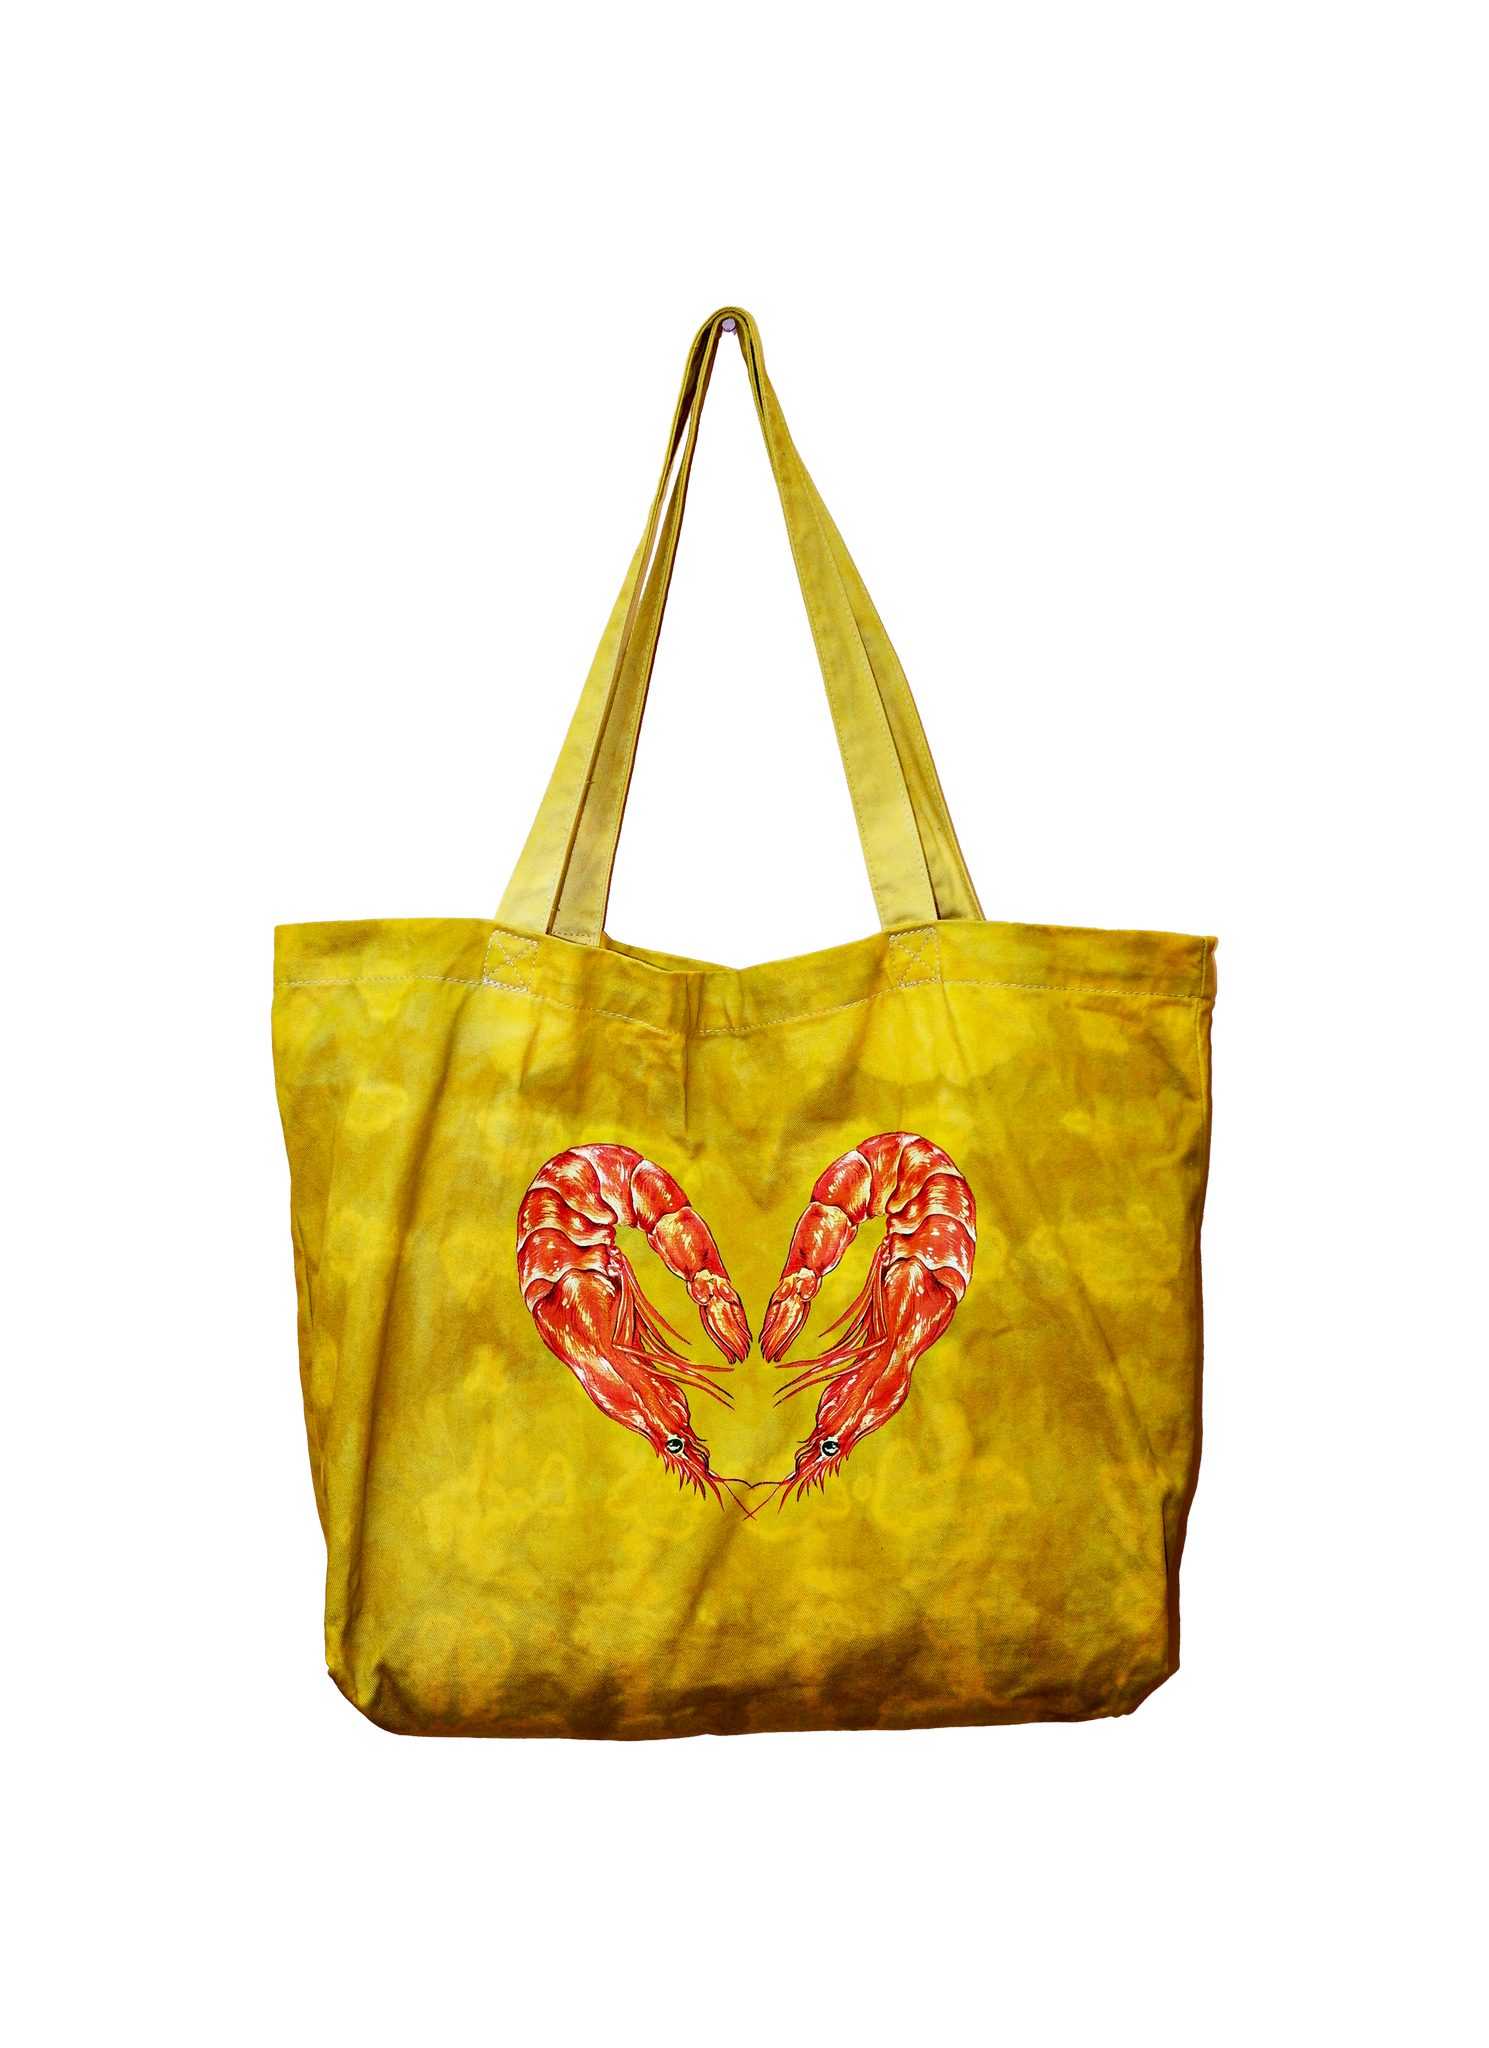 RUSTED GOLD HEART TOTE